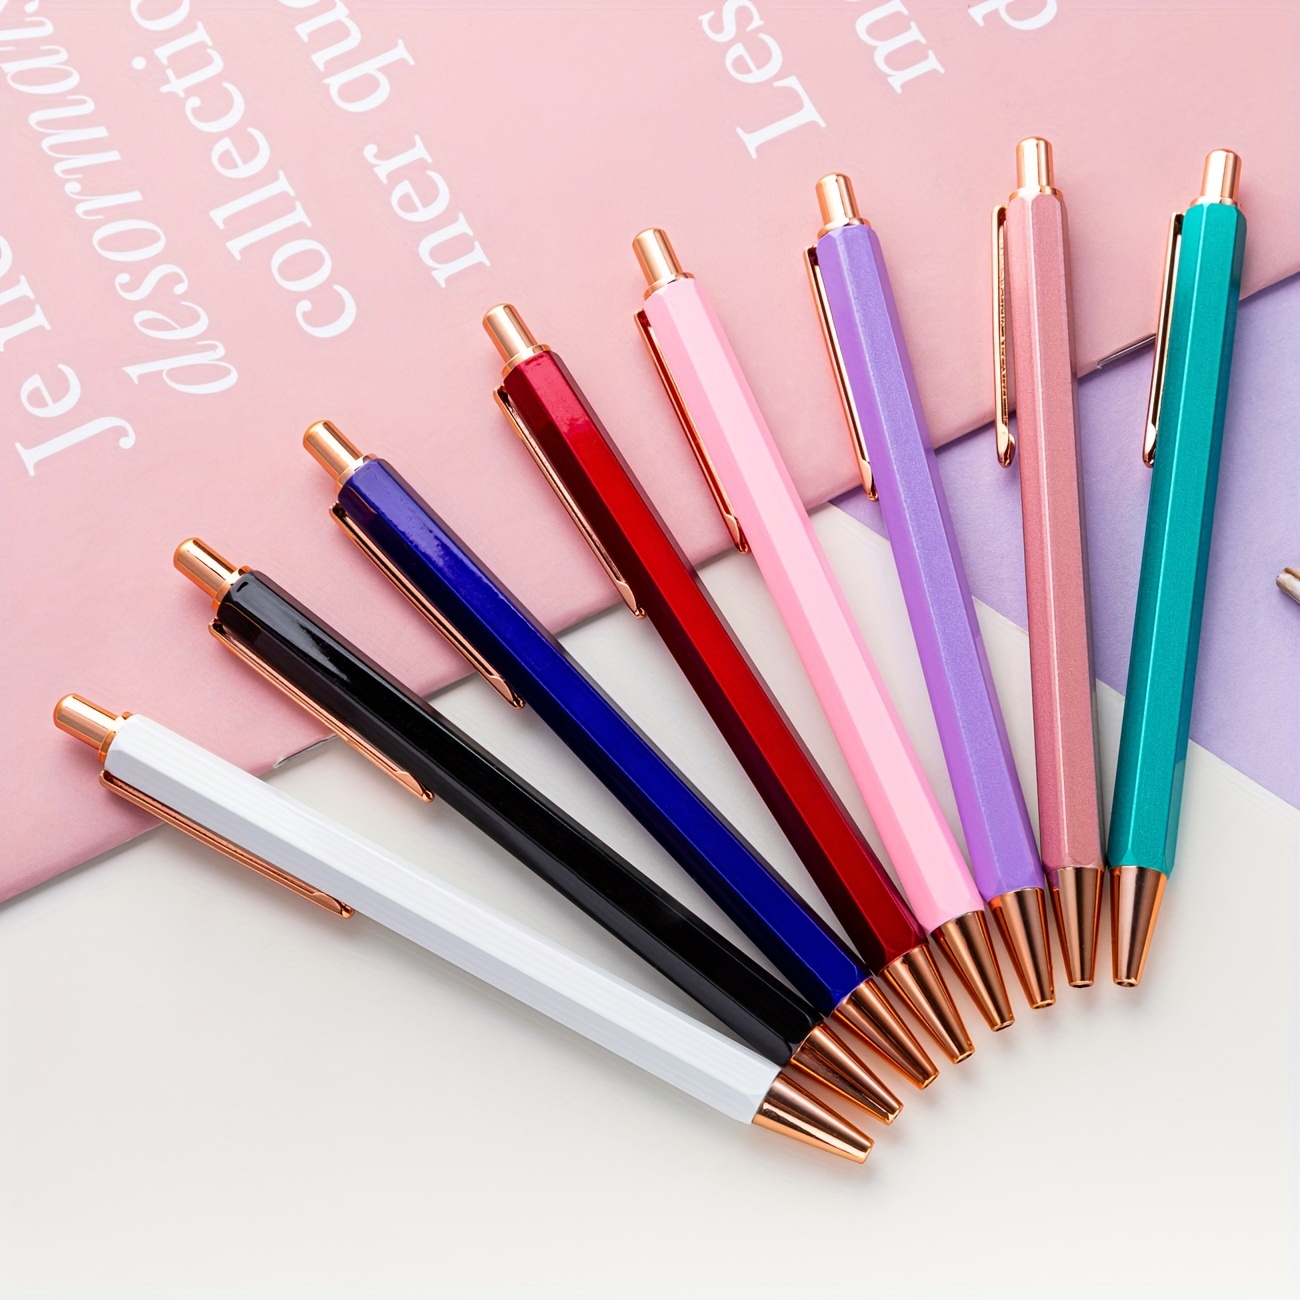 Hexagon Ballpoint Pens For Journaling, Cute Comfortable Writing Metal  Retractable Pretty Pens For Women Office Supplies Gift, Back To School,  School Supplies, Kawaii Stationery, Colors For School, Markers, Writing  Pens, Back To